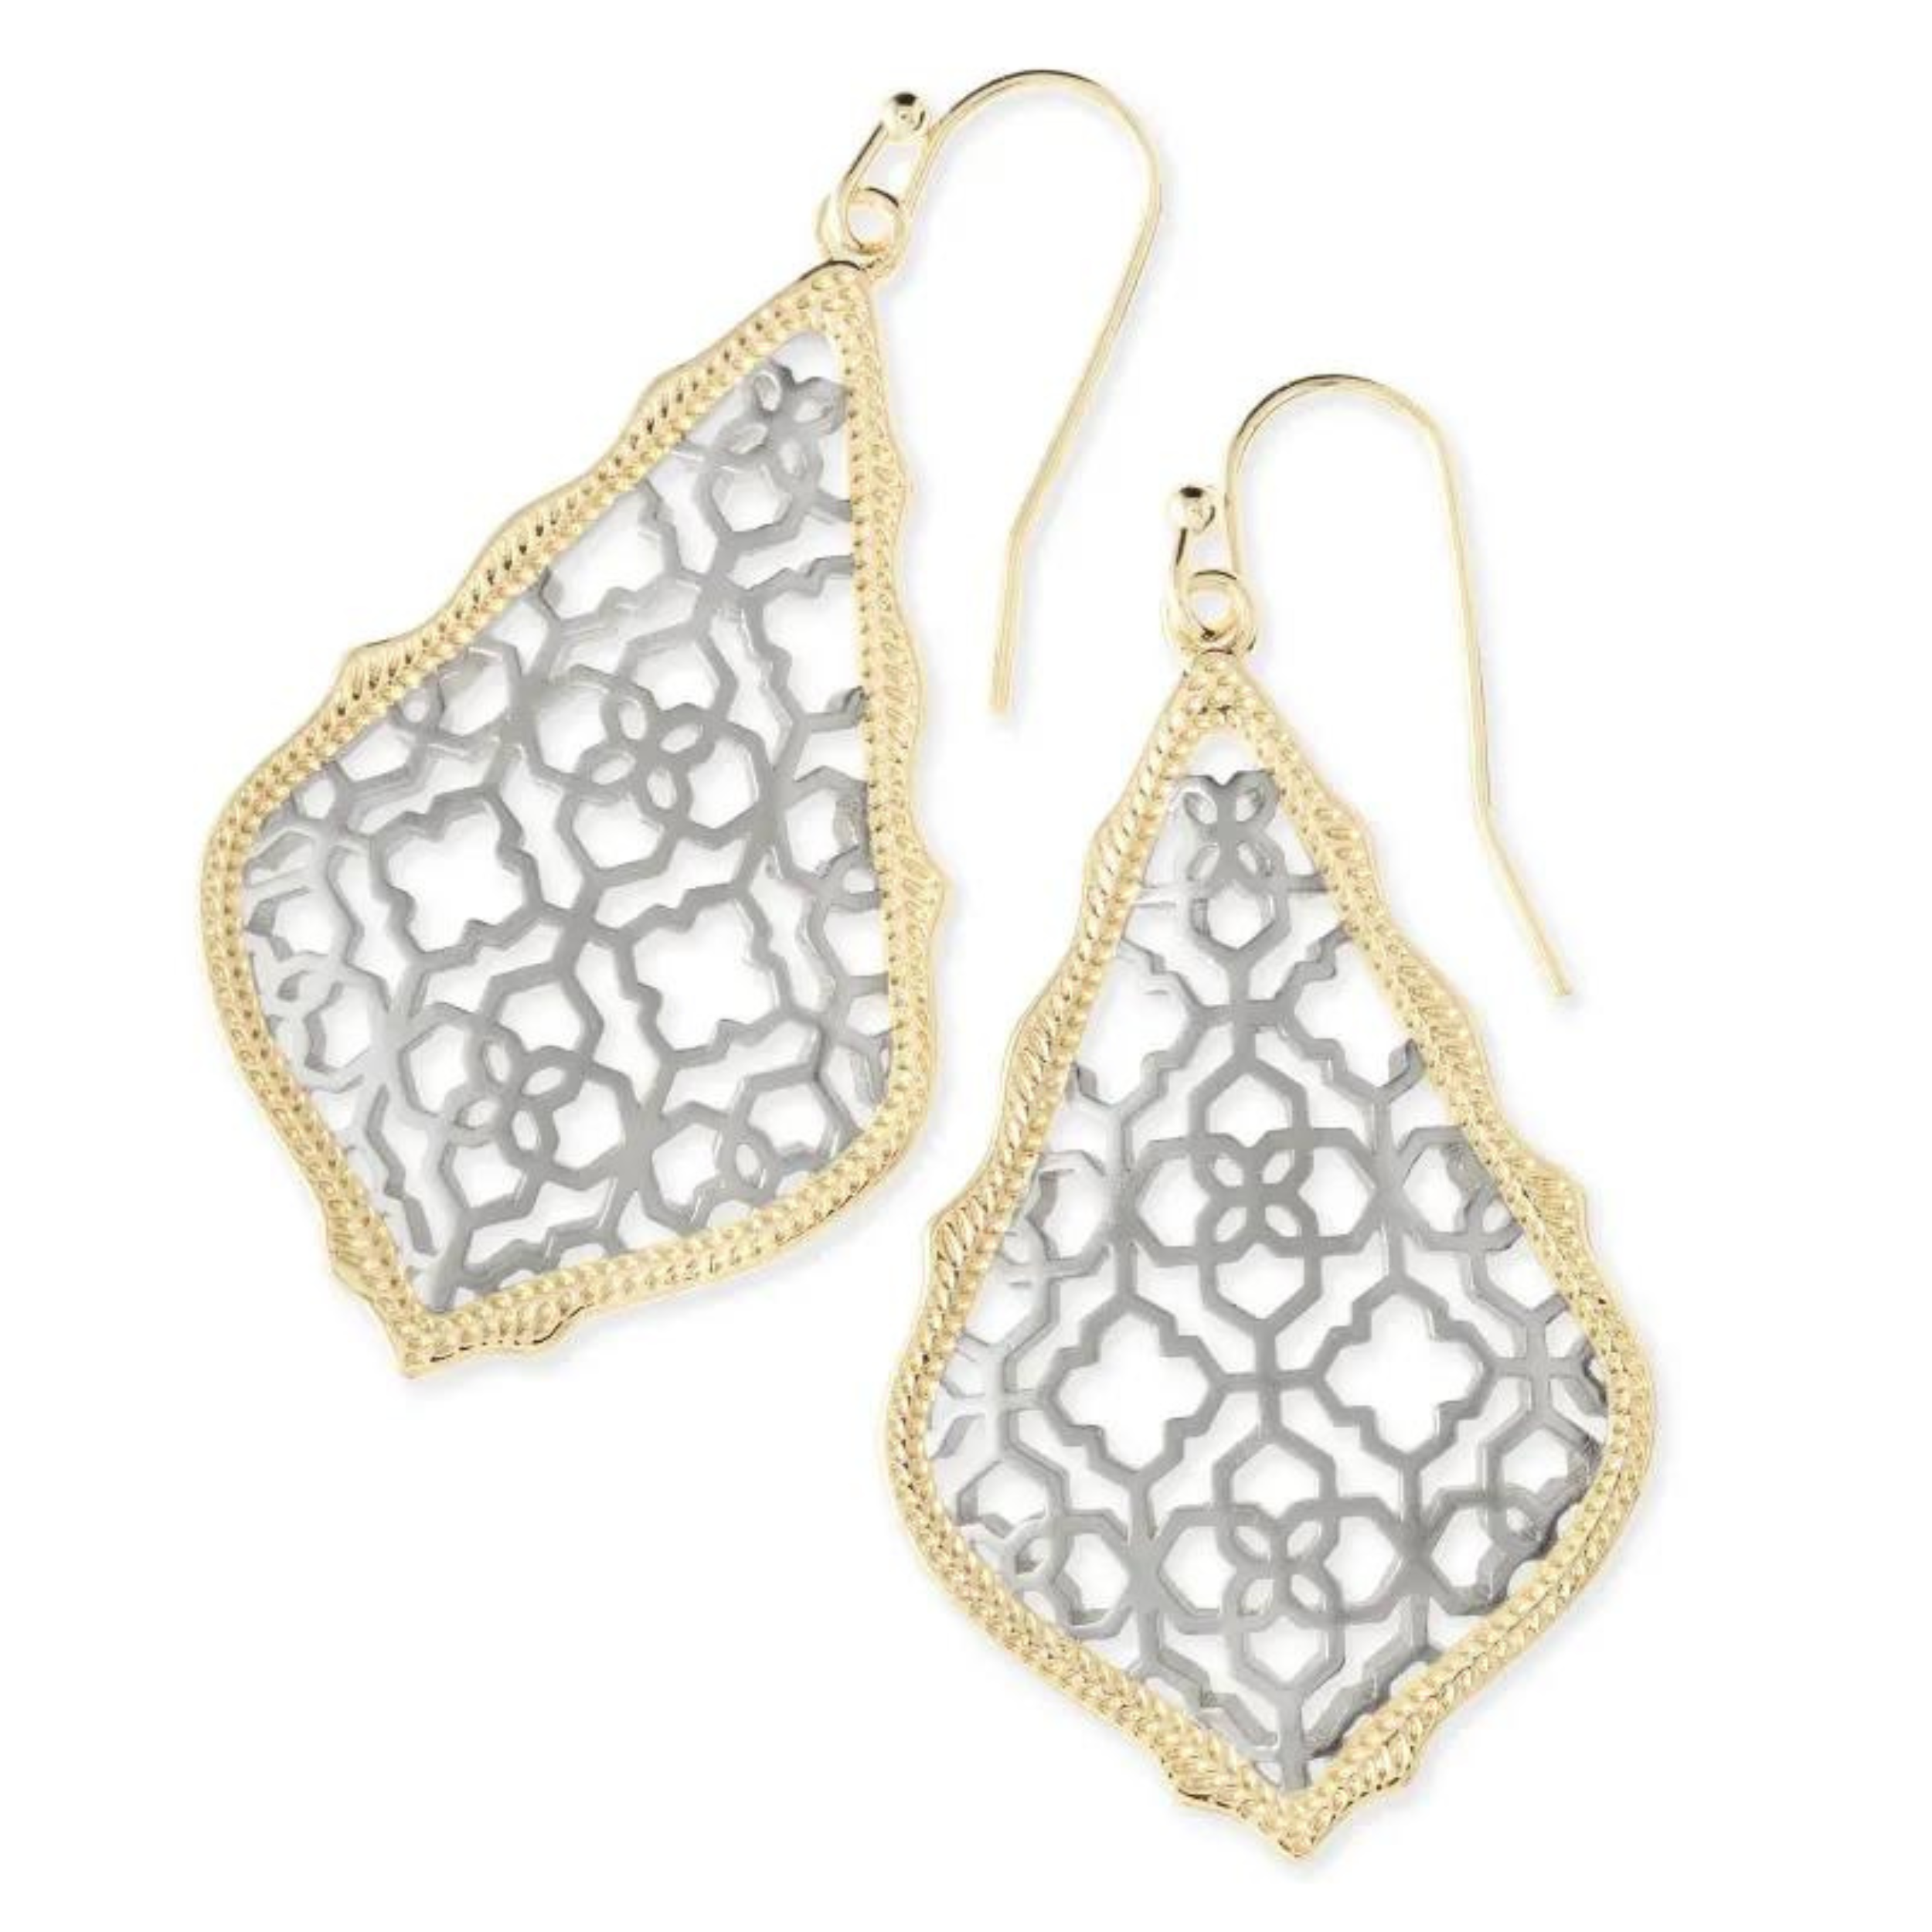 A mix of gold and silver dangle earrings pictured on a white background.